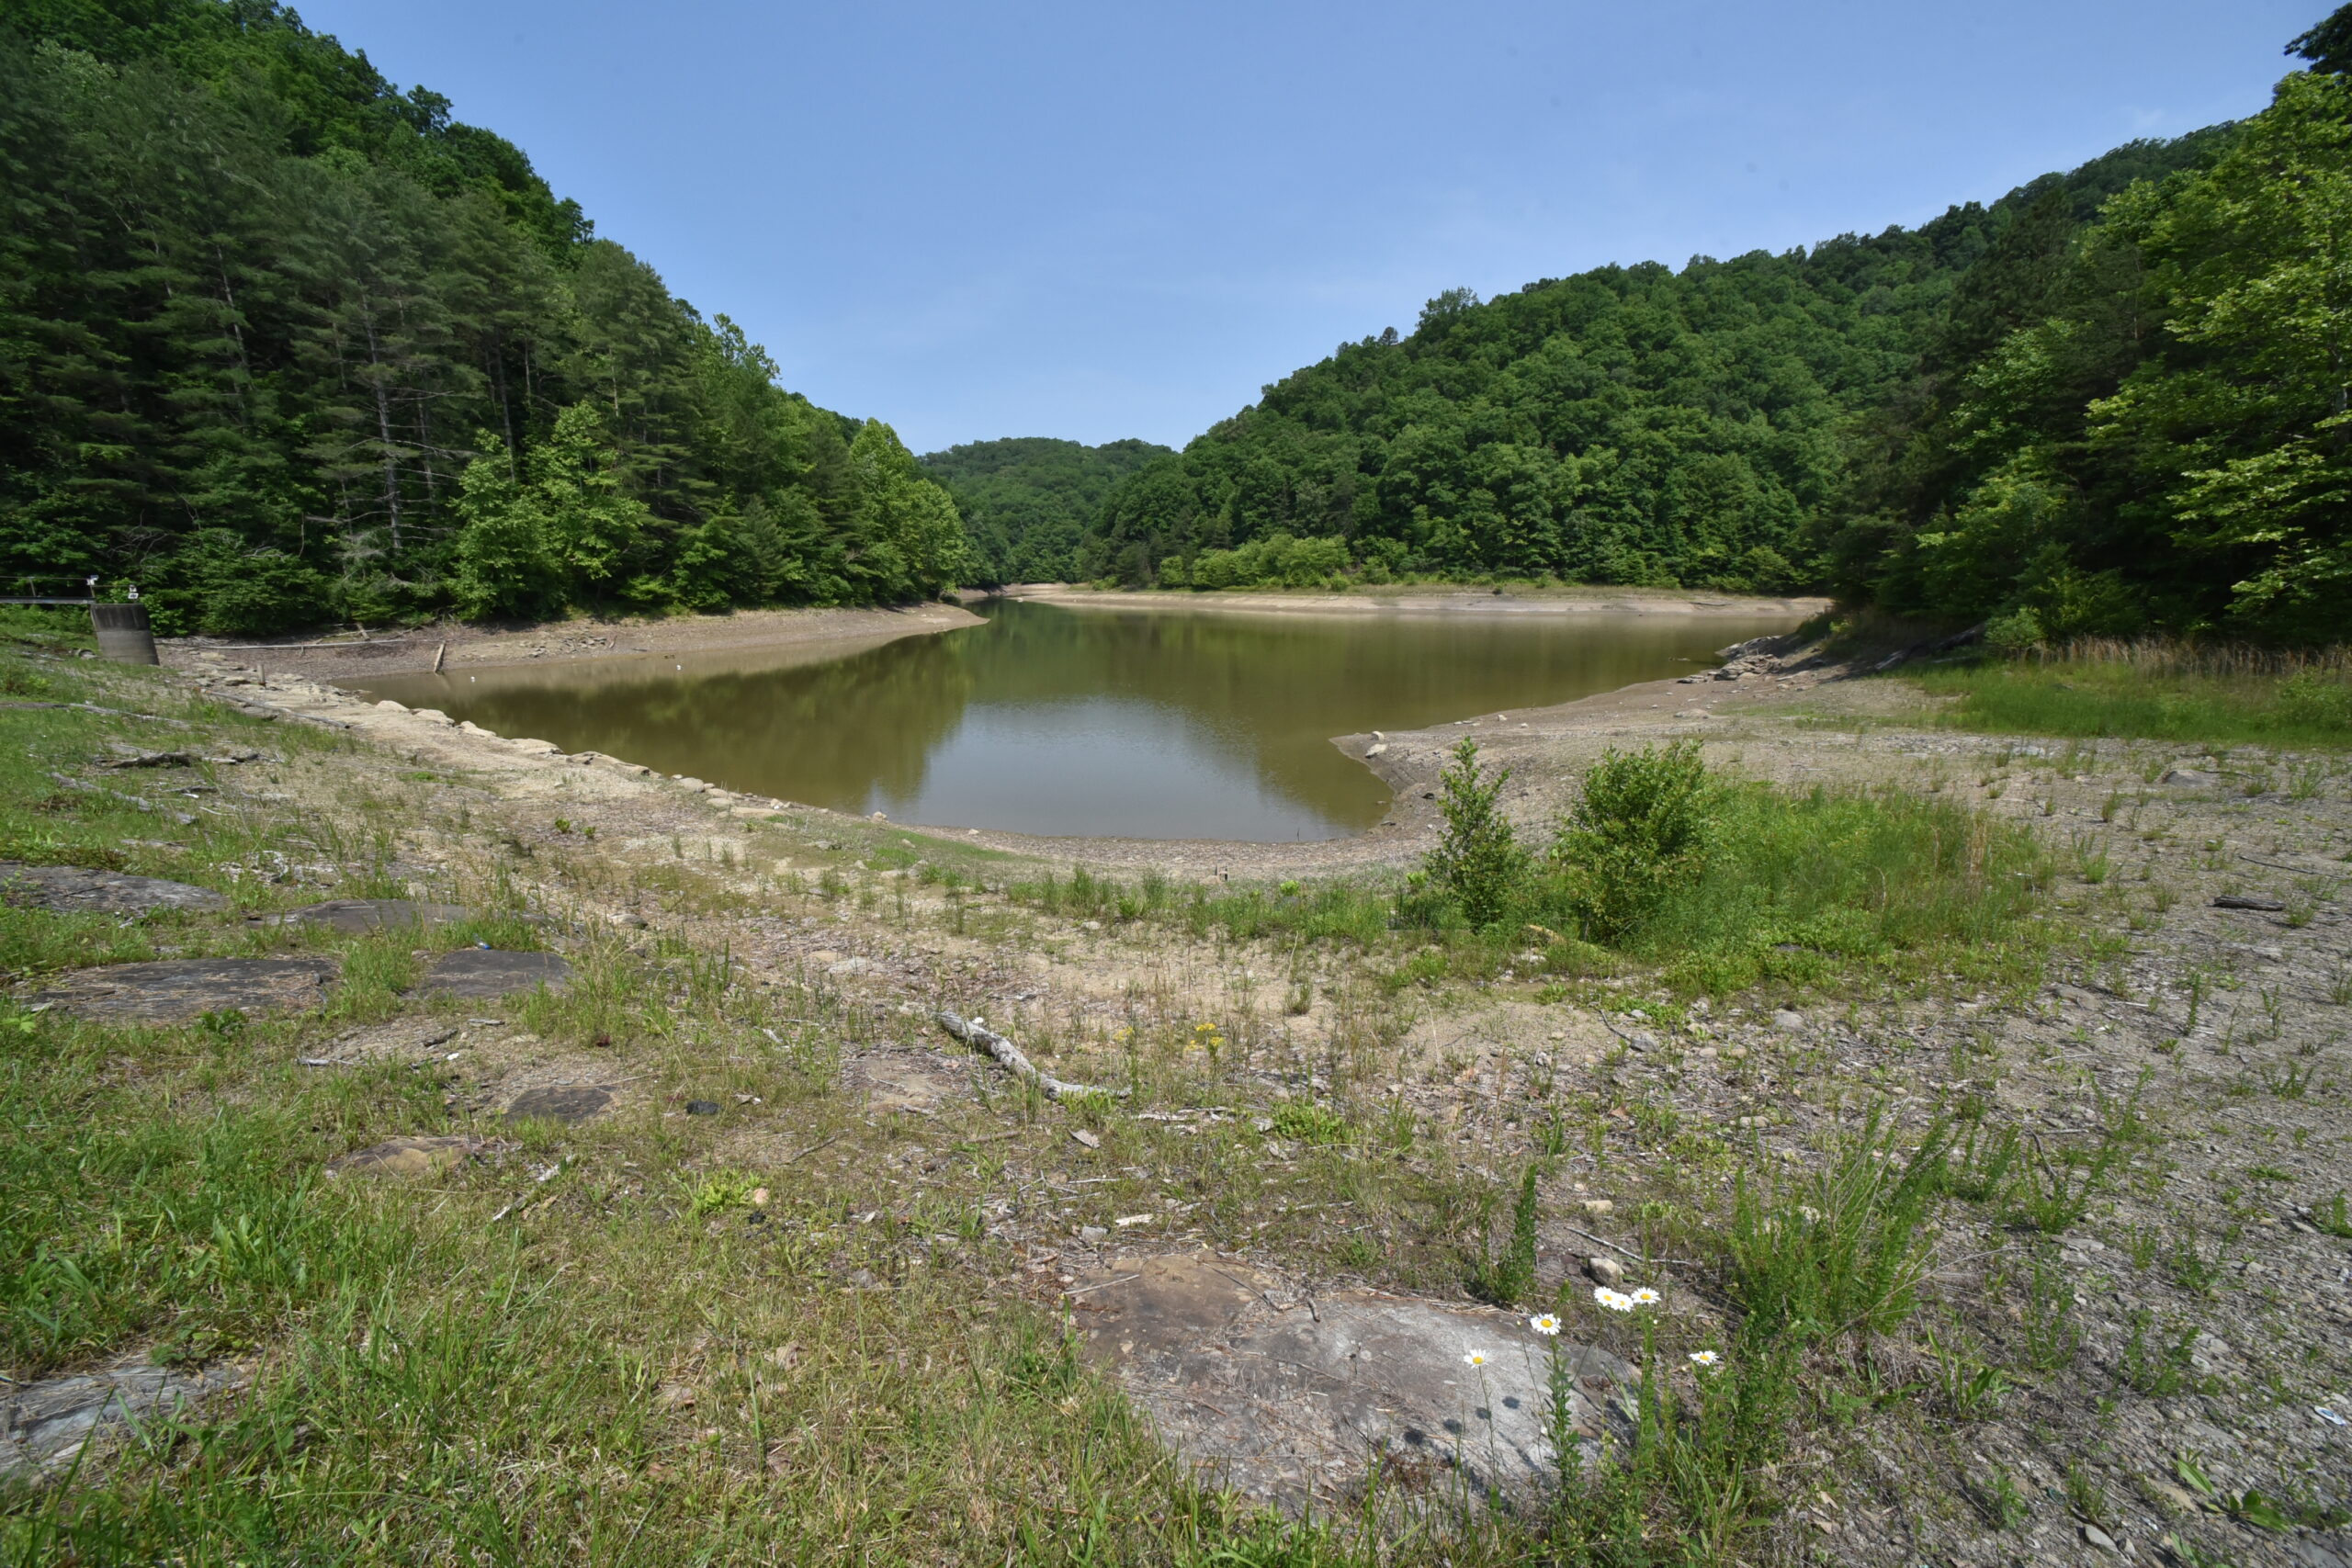 Curtis Crum Reservoir at dangerously low level